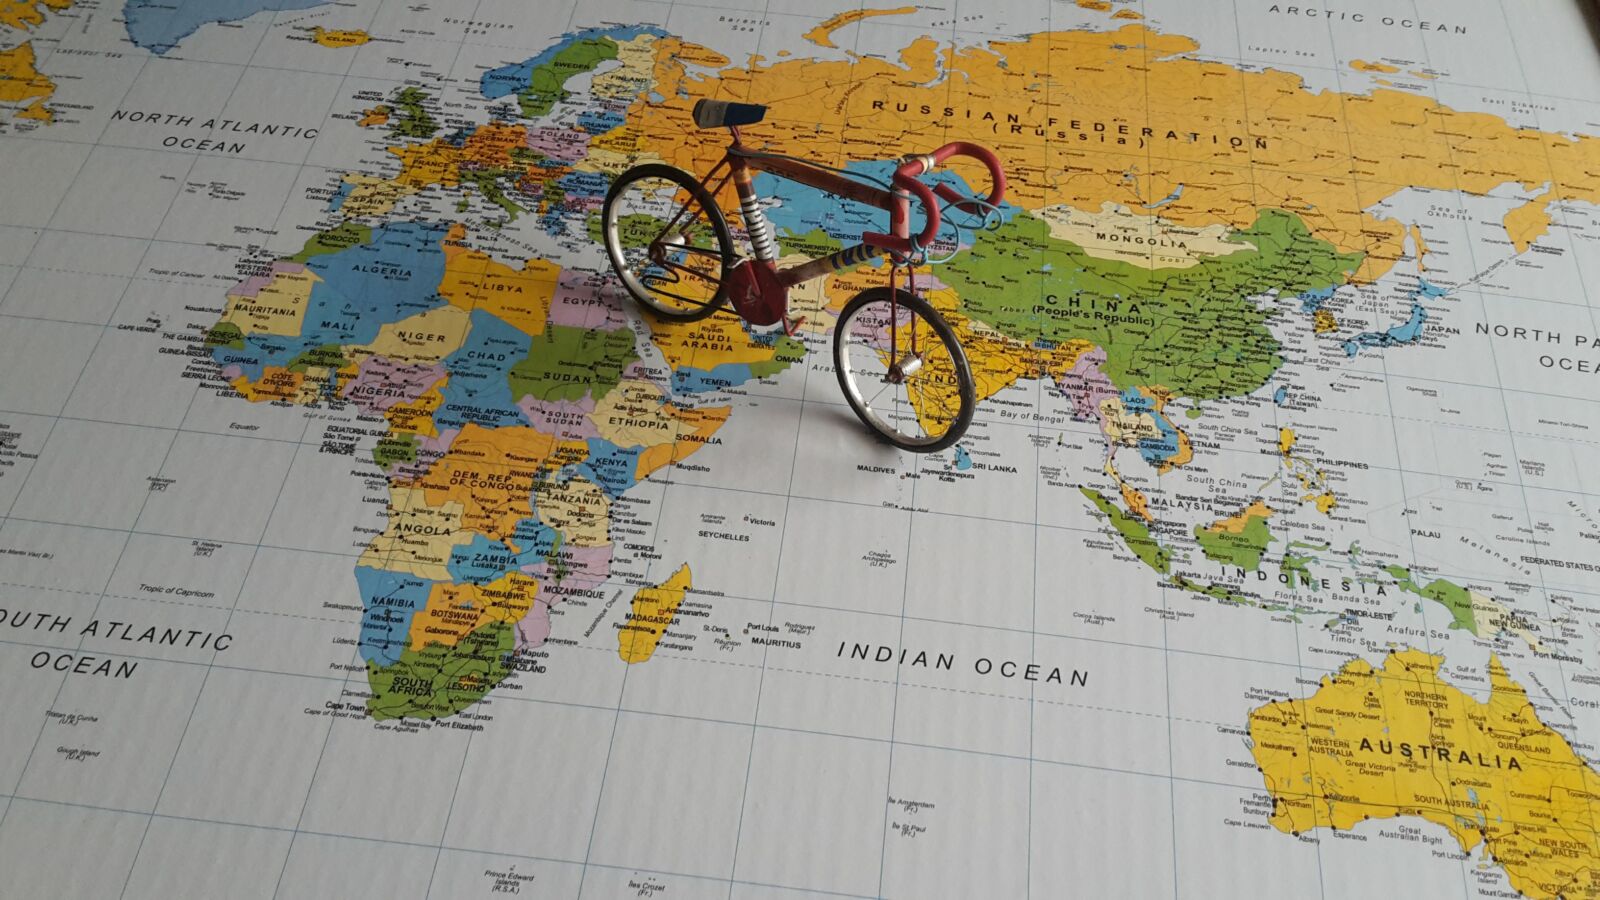 Bicycle on a map of the world